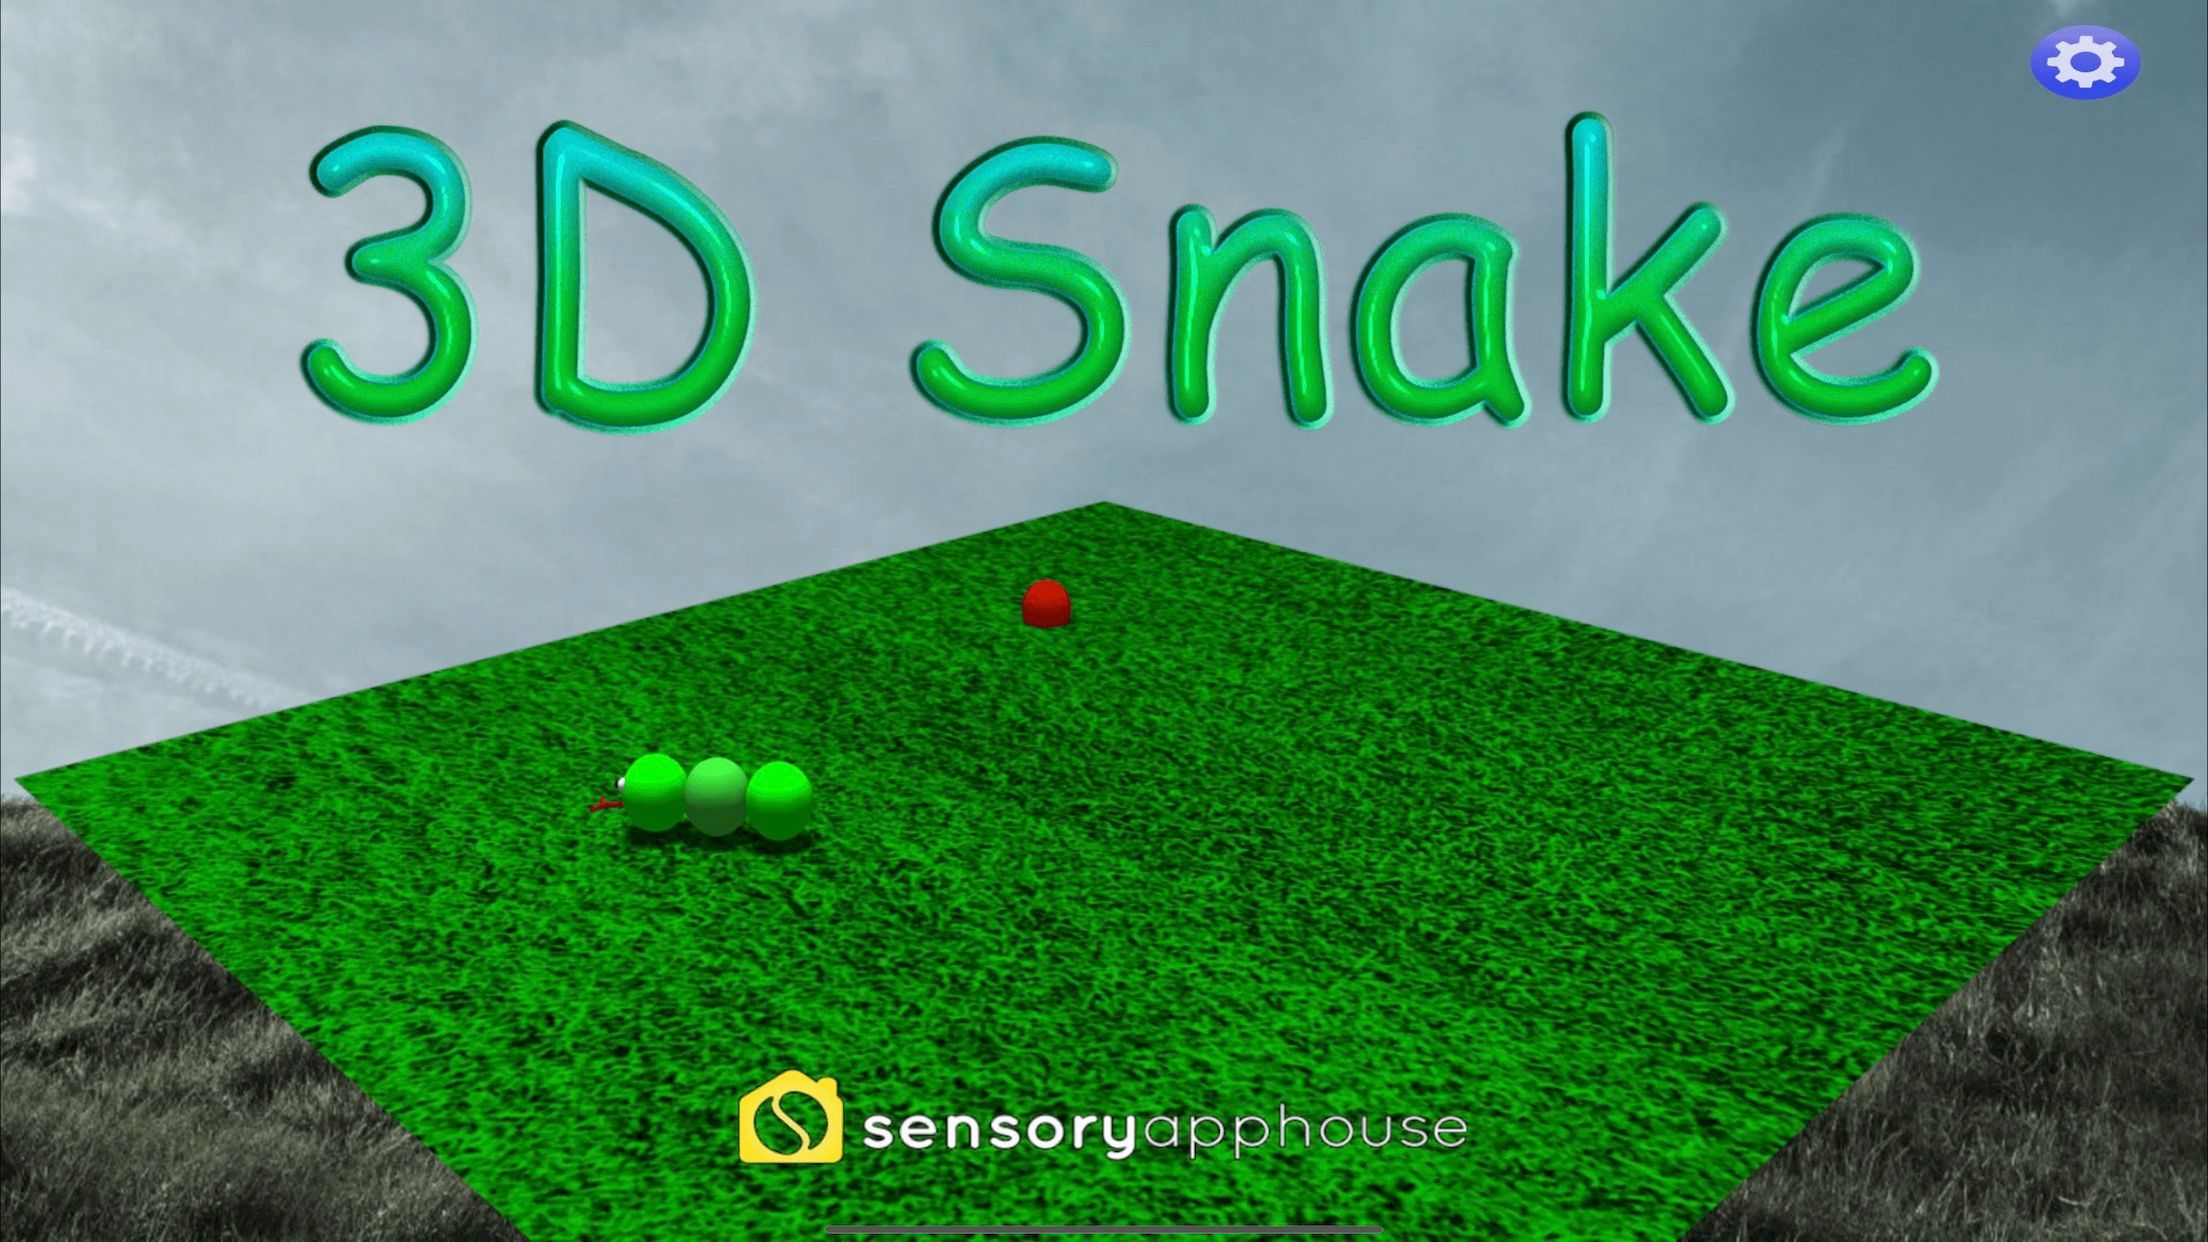 3D Snake early learning activity